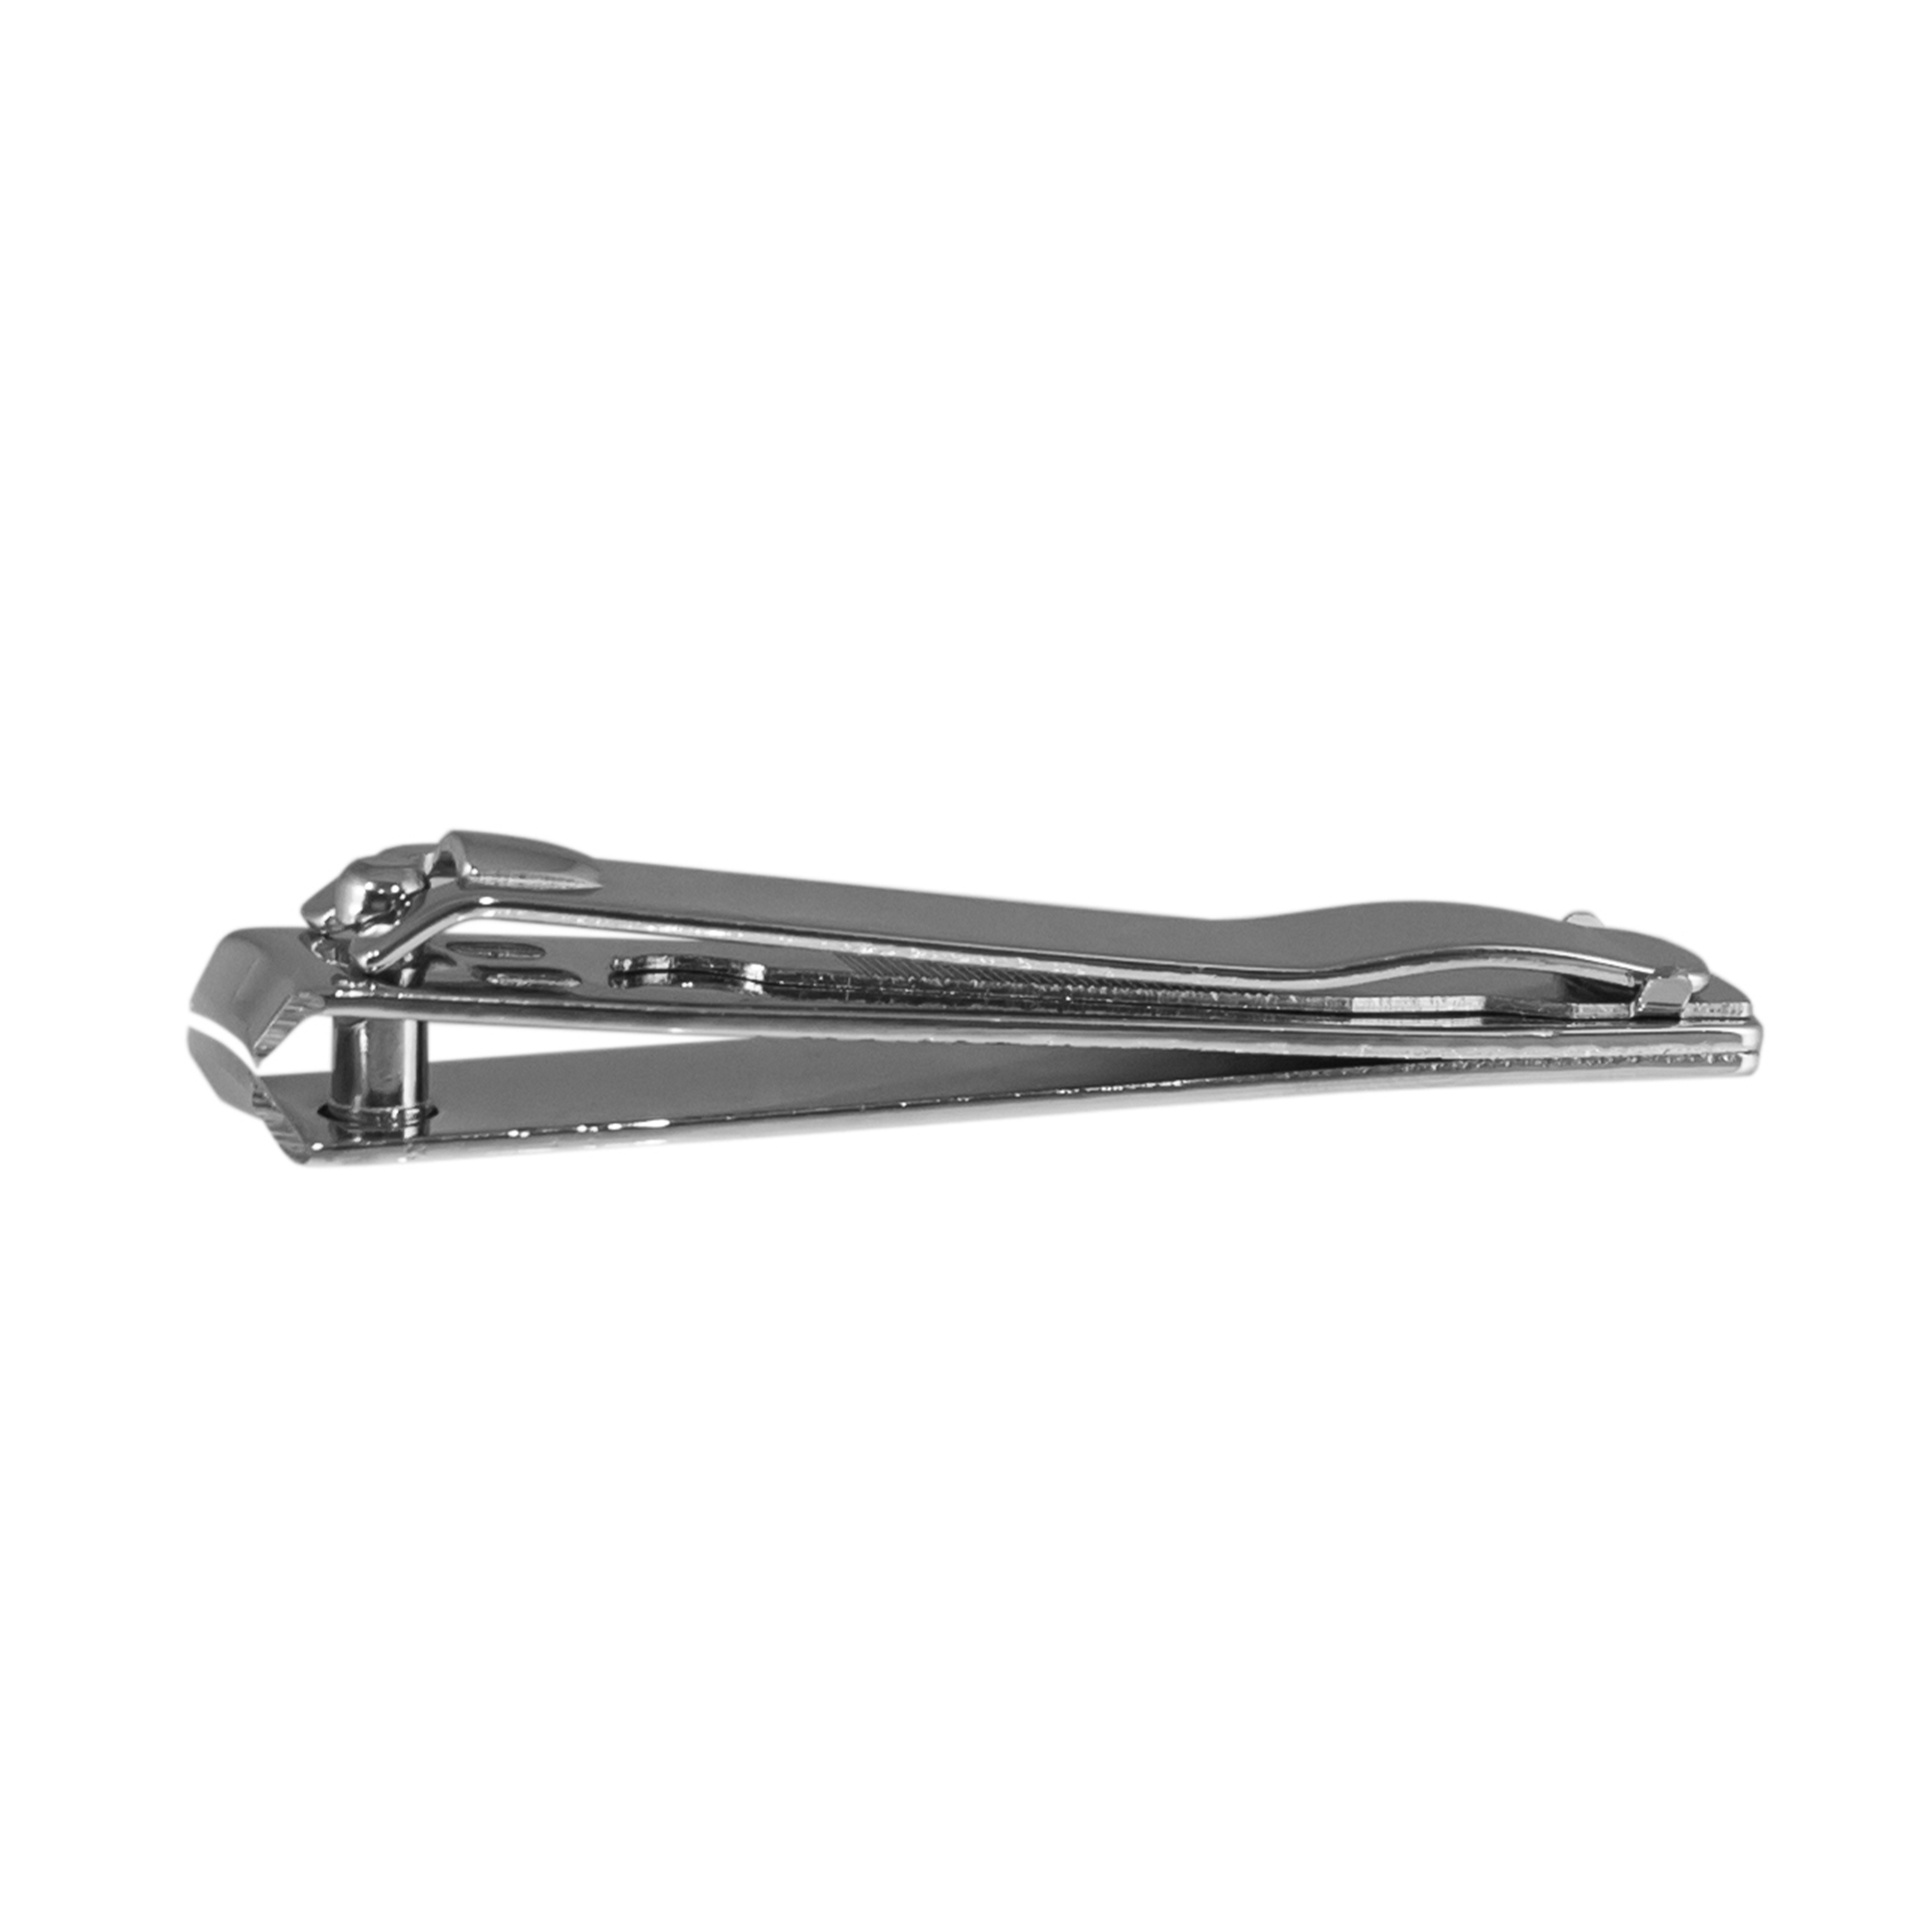 Toe & Fingernail Clippers Products, Supplies and Equipment